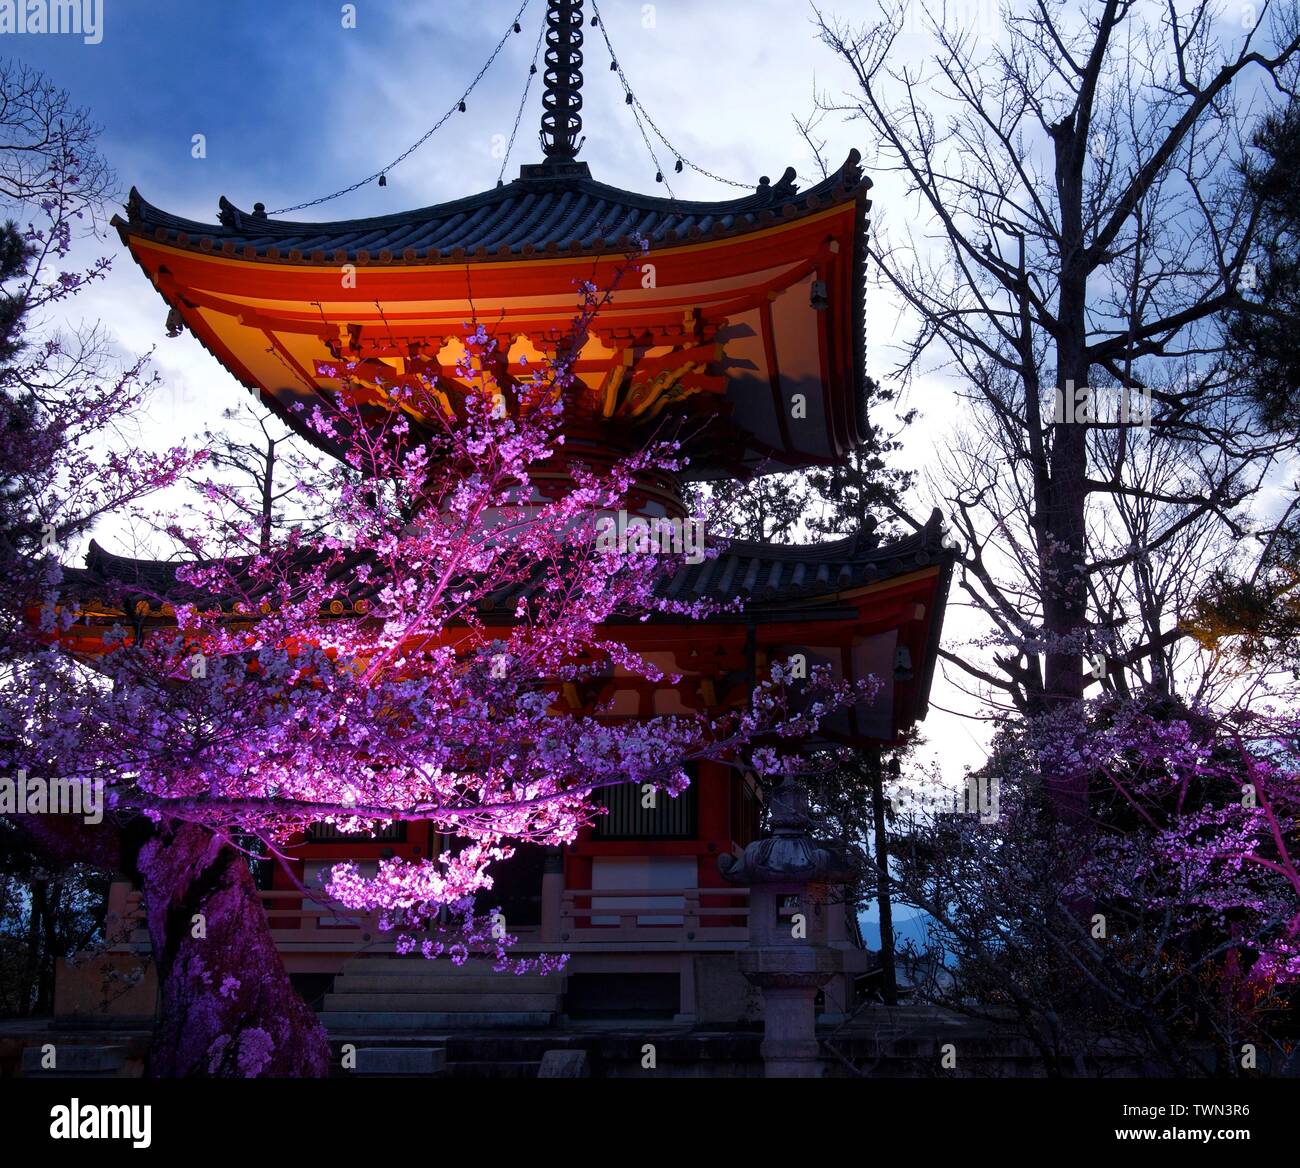 Red Three Story Pagoda at Chion-in or Chionin Temple grounds at dusk with a cherry blossom tree or sakura, Kyoto, Japan Stock Photo